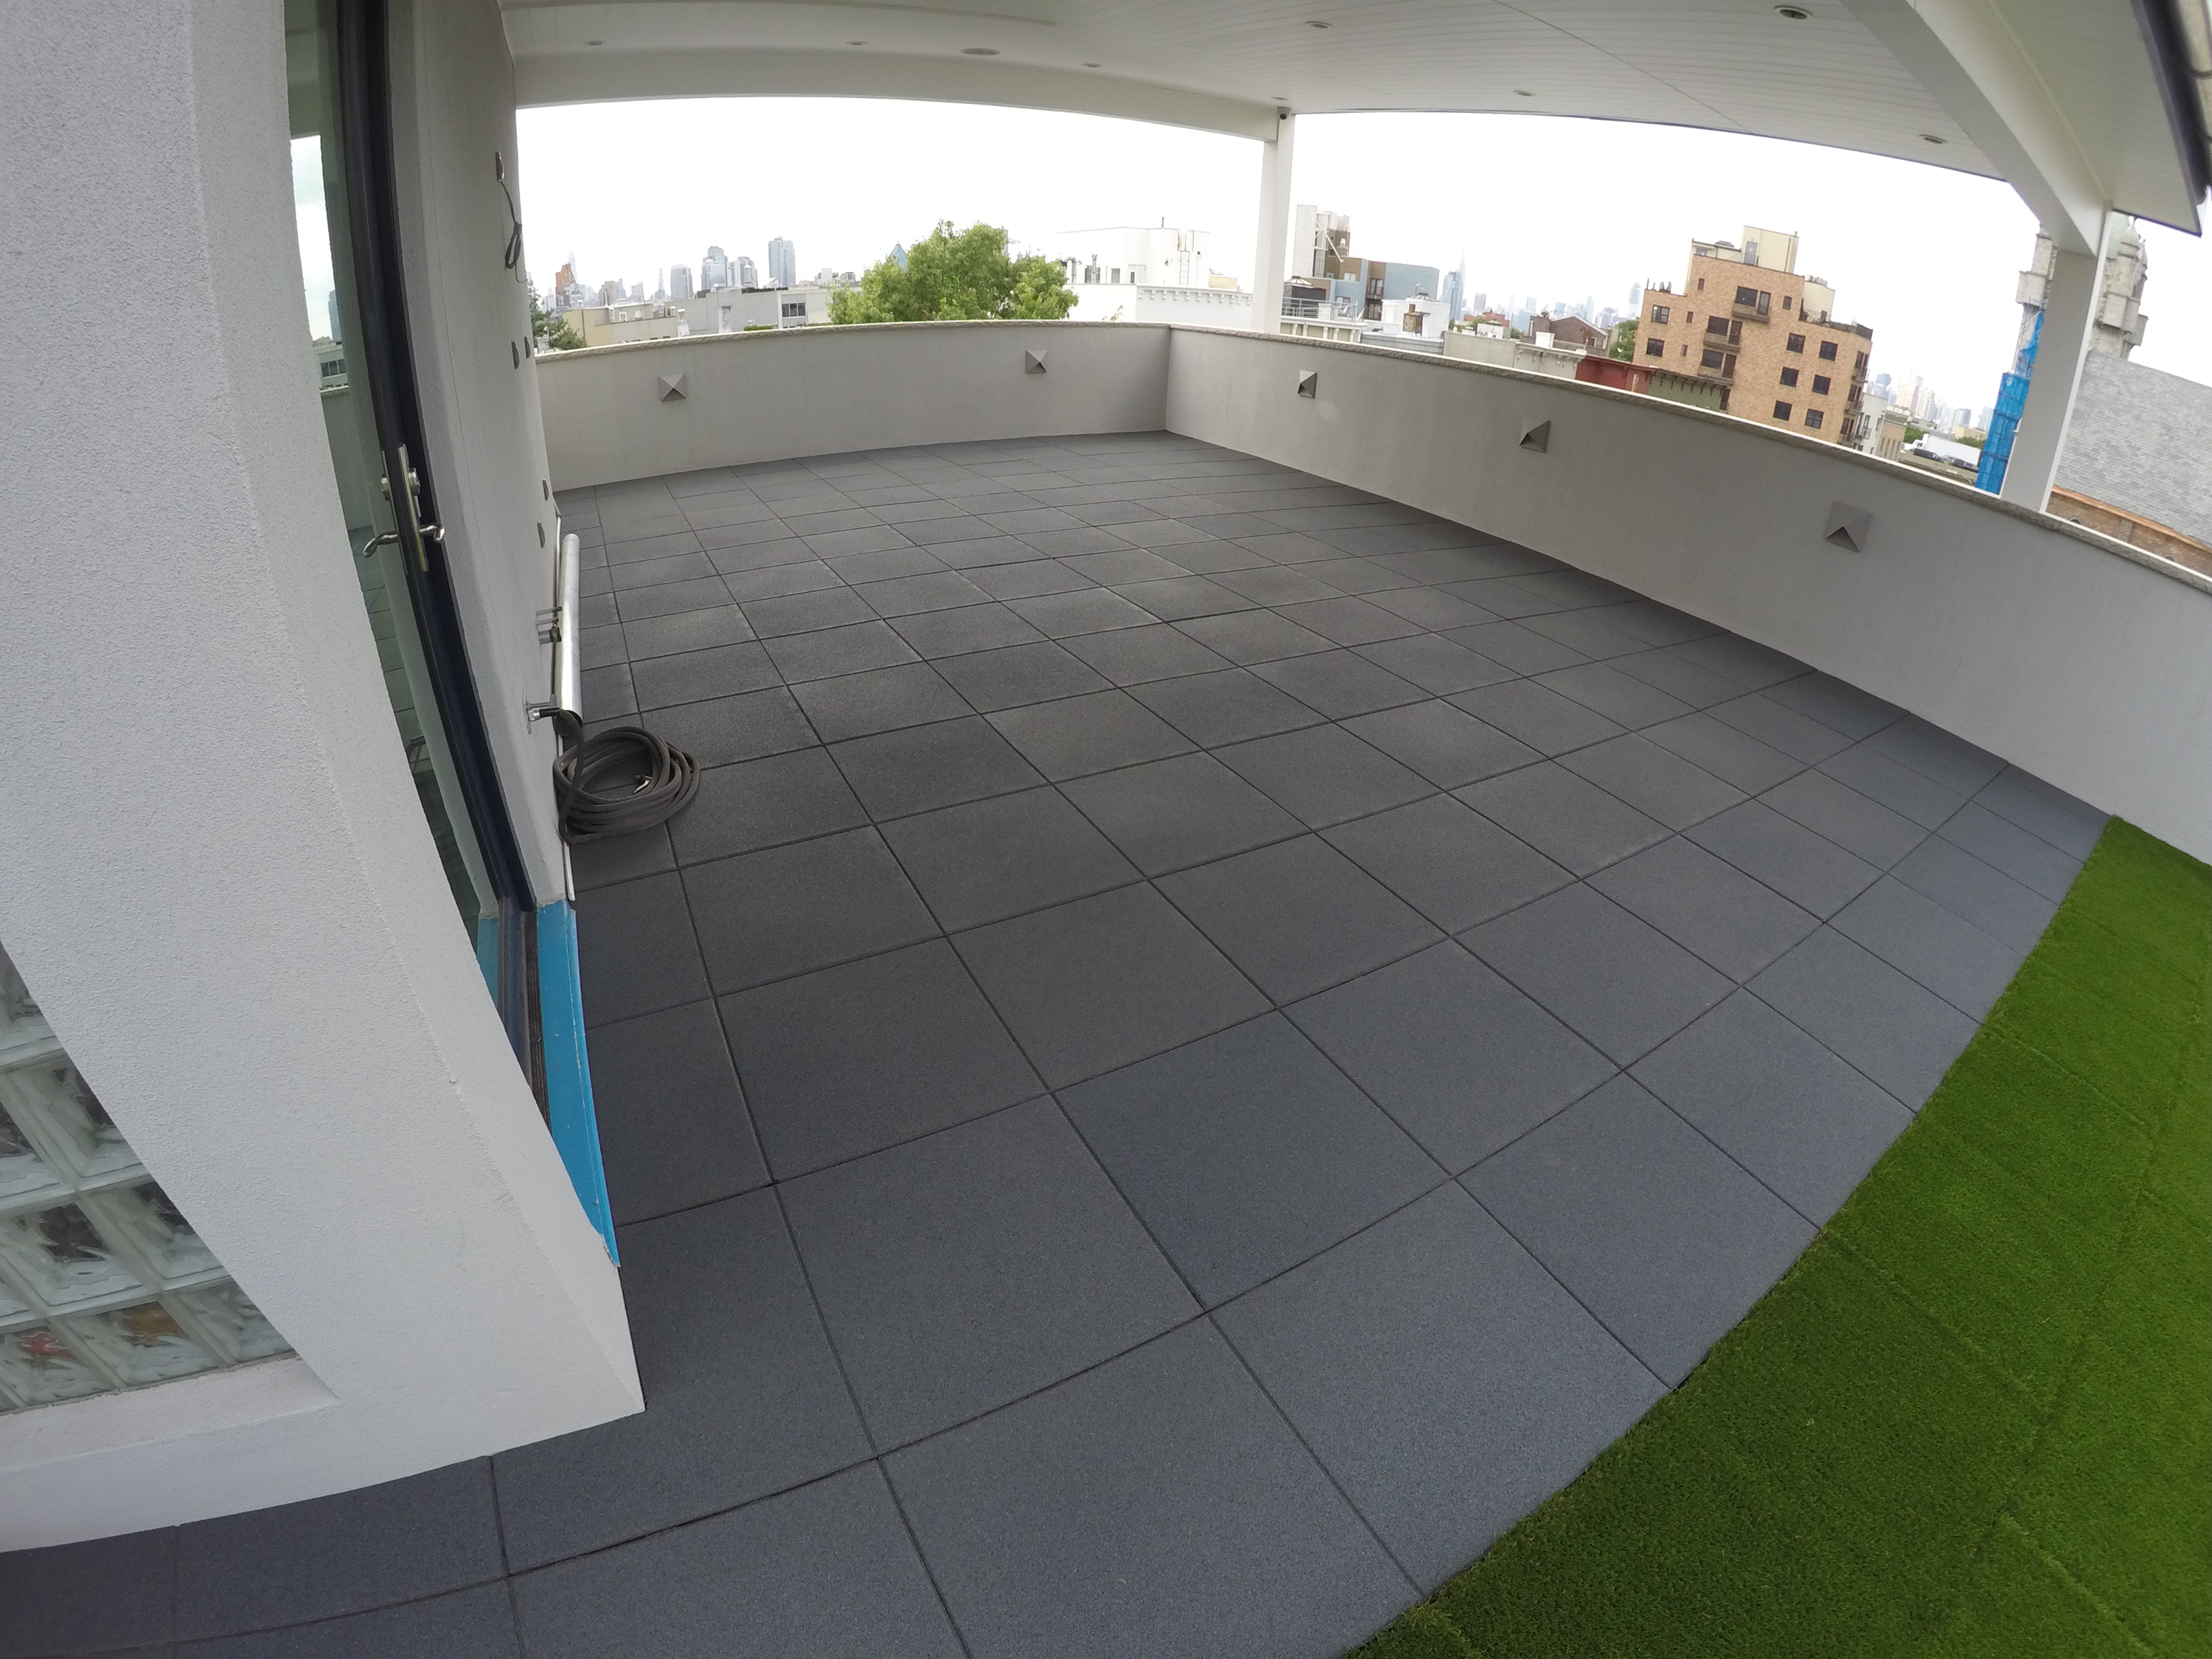 Our rubber tiles and our Turf-Top tiles on this rooftop patio area.